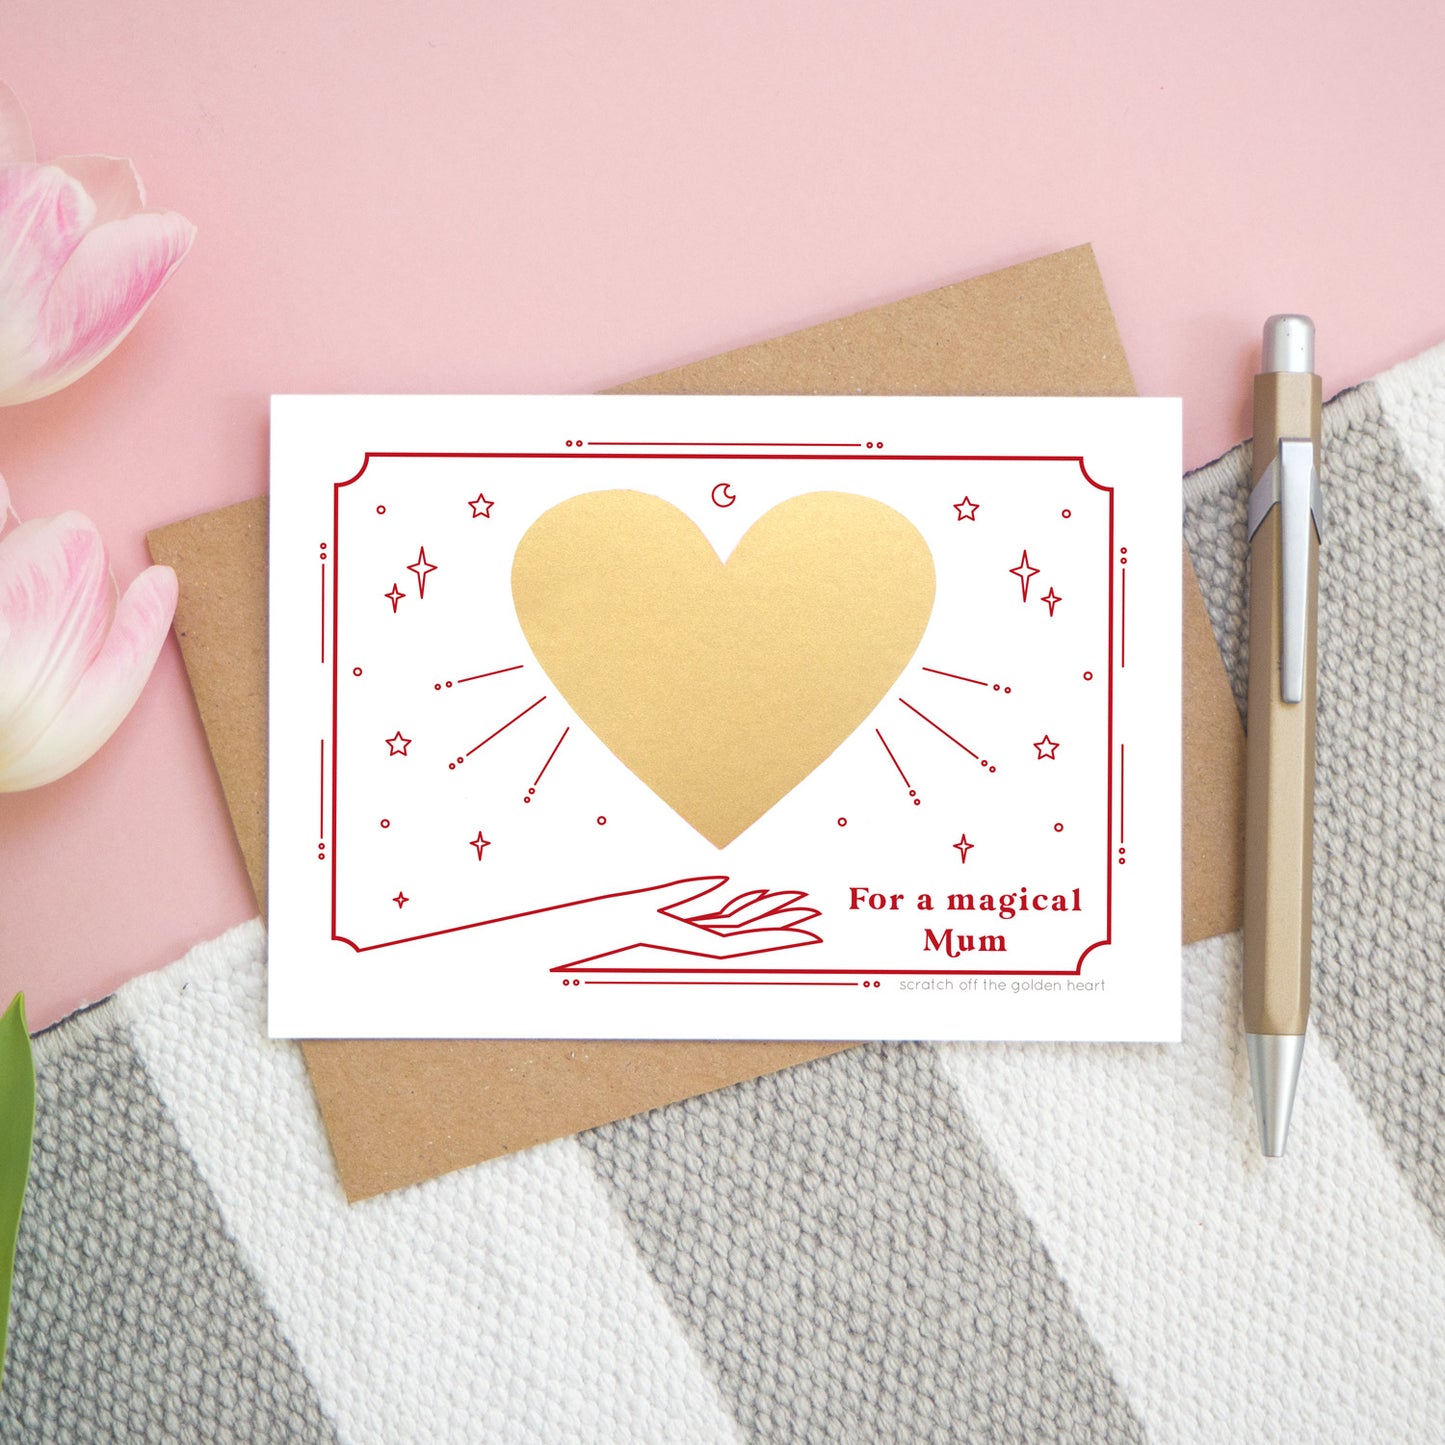 A personalised 'magical mum' scratch card before the gold heart is scratch off. Card is photographed from above on a pink, white and grey background with a pen for scale.